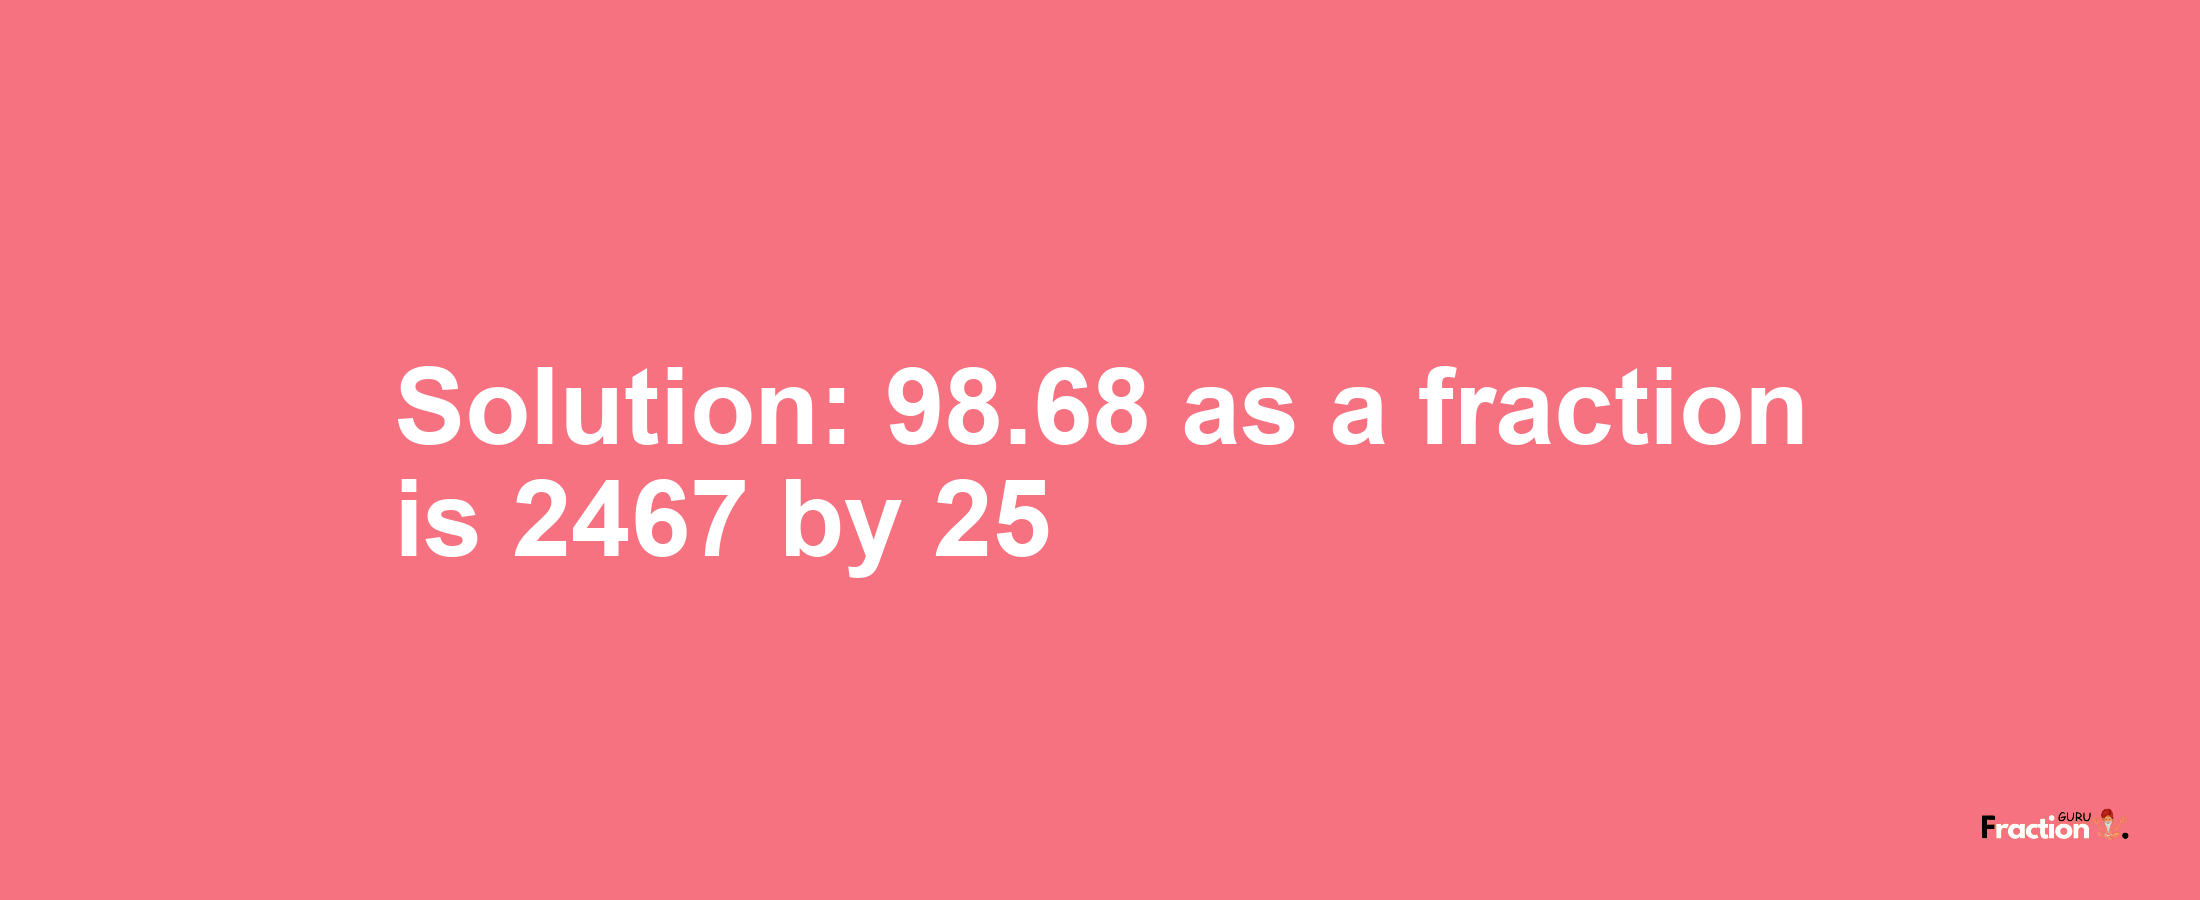 Solution:98.68 as a fraction is 2467/25